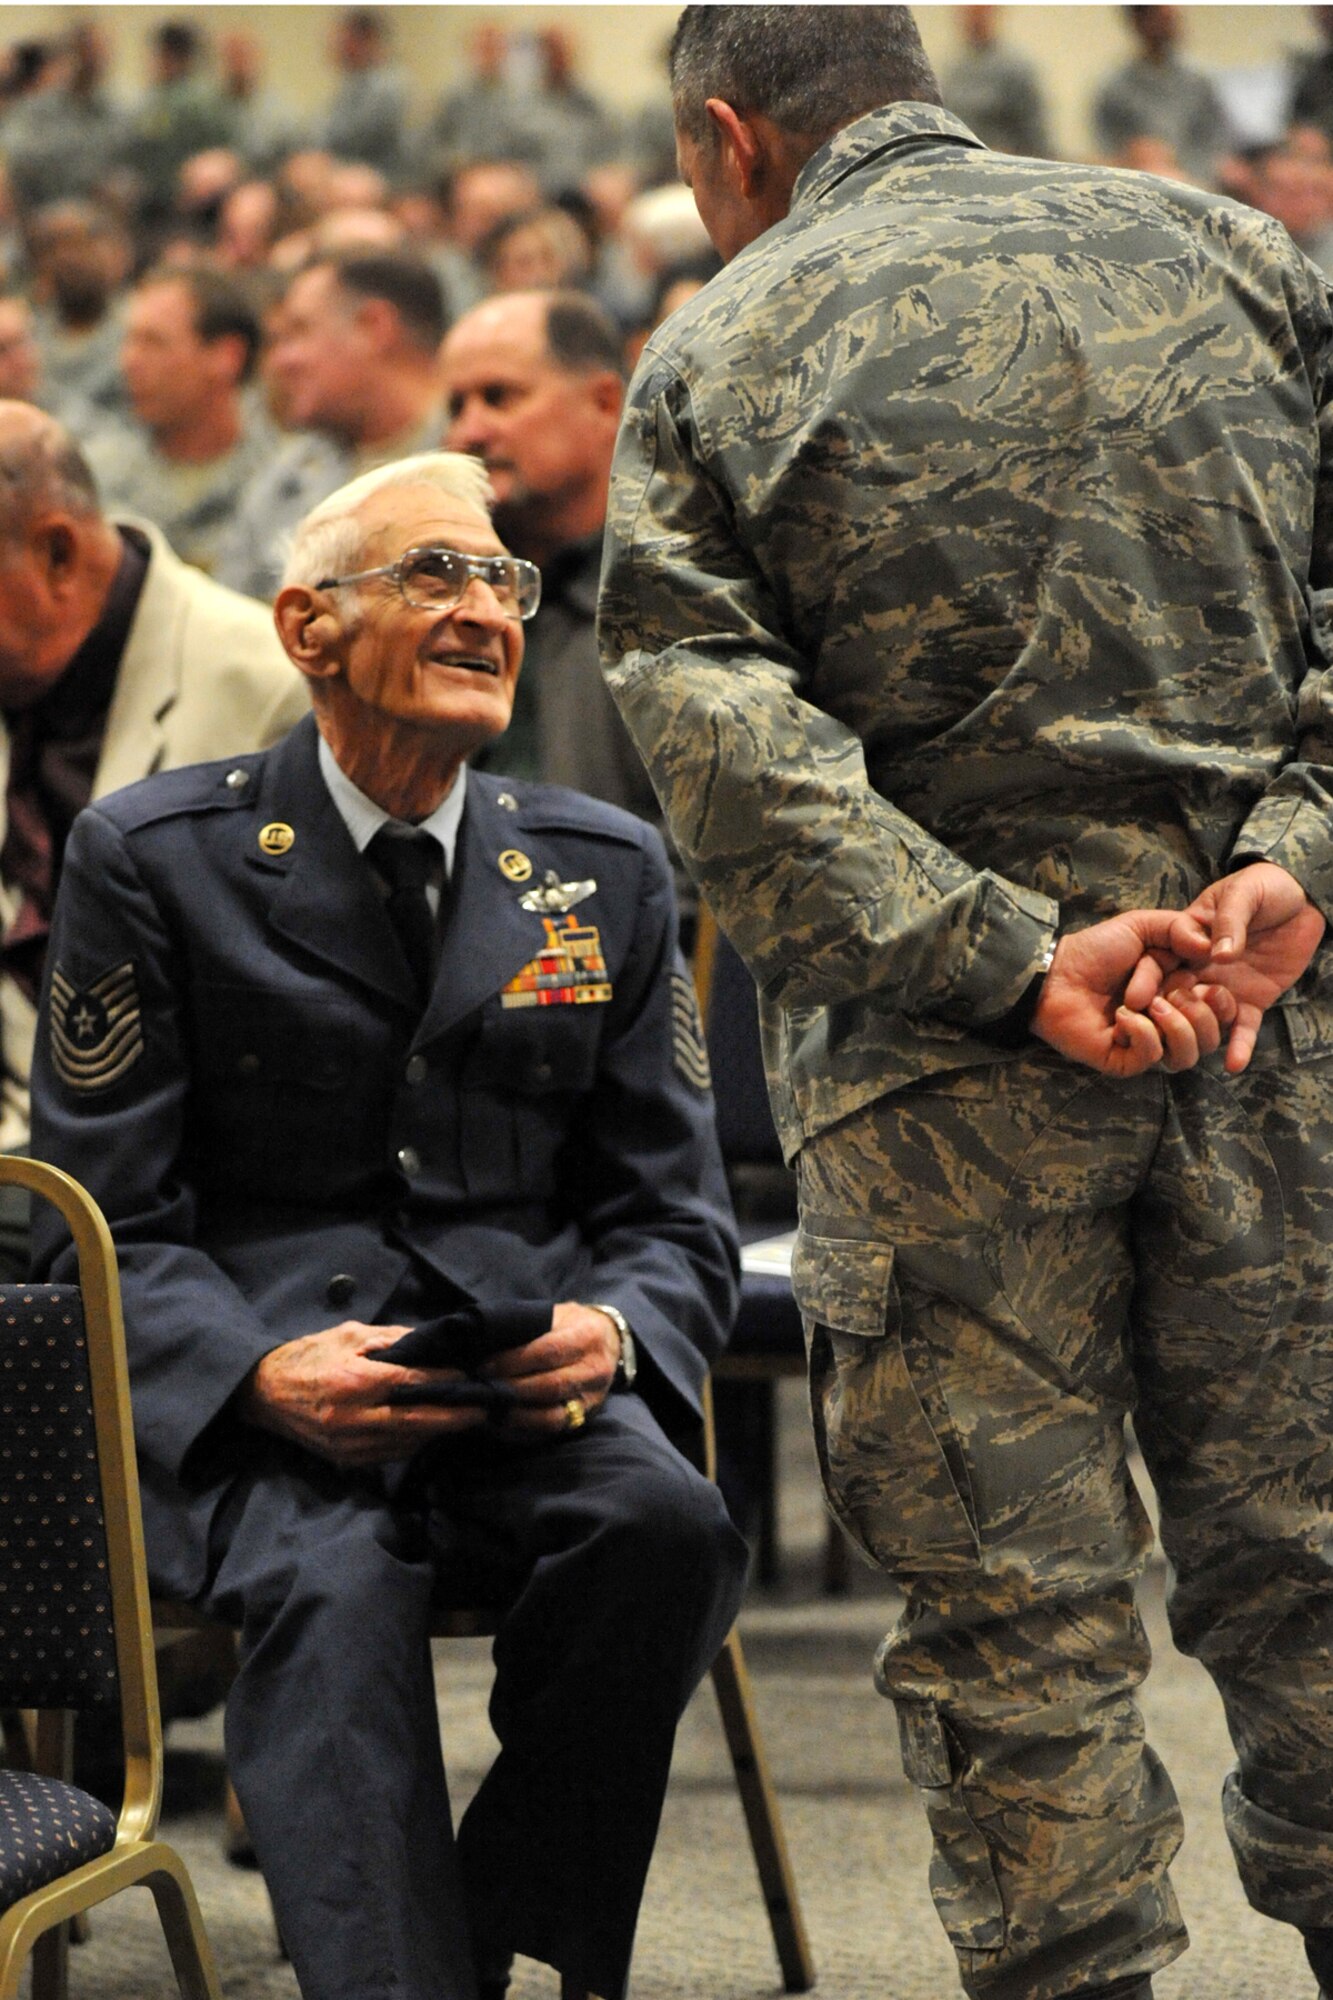 A present day 307th Bomb Wing Airman speaks with Master Sgt. (Ret) Loren T. Longman, a 307th BW alumni before the reactivation ceremonies for the 307th BW at Barksdale Air Force Base, La., Jan. 8, 2011. Sergeant Longman is a World War II and Korean War veteran who served in the 307th BW from 1947-55. During the same ceremonies, the 917th Wing was deactivated and the 917th Operations Group was re-designated as the 917th Fighter Group. (U.S. Air Force photo/Staff Sgt. Travis Robertson)